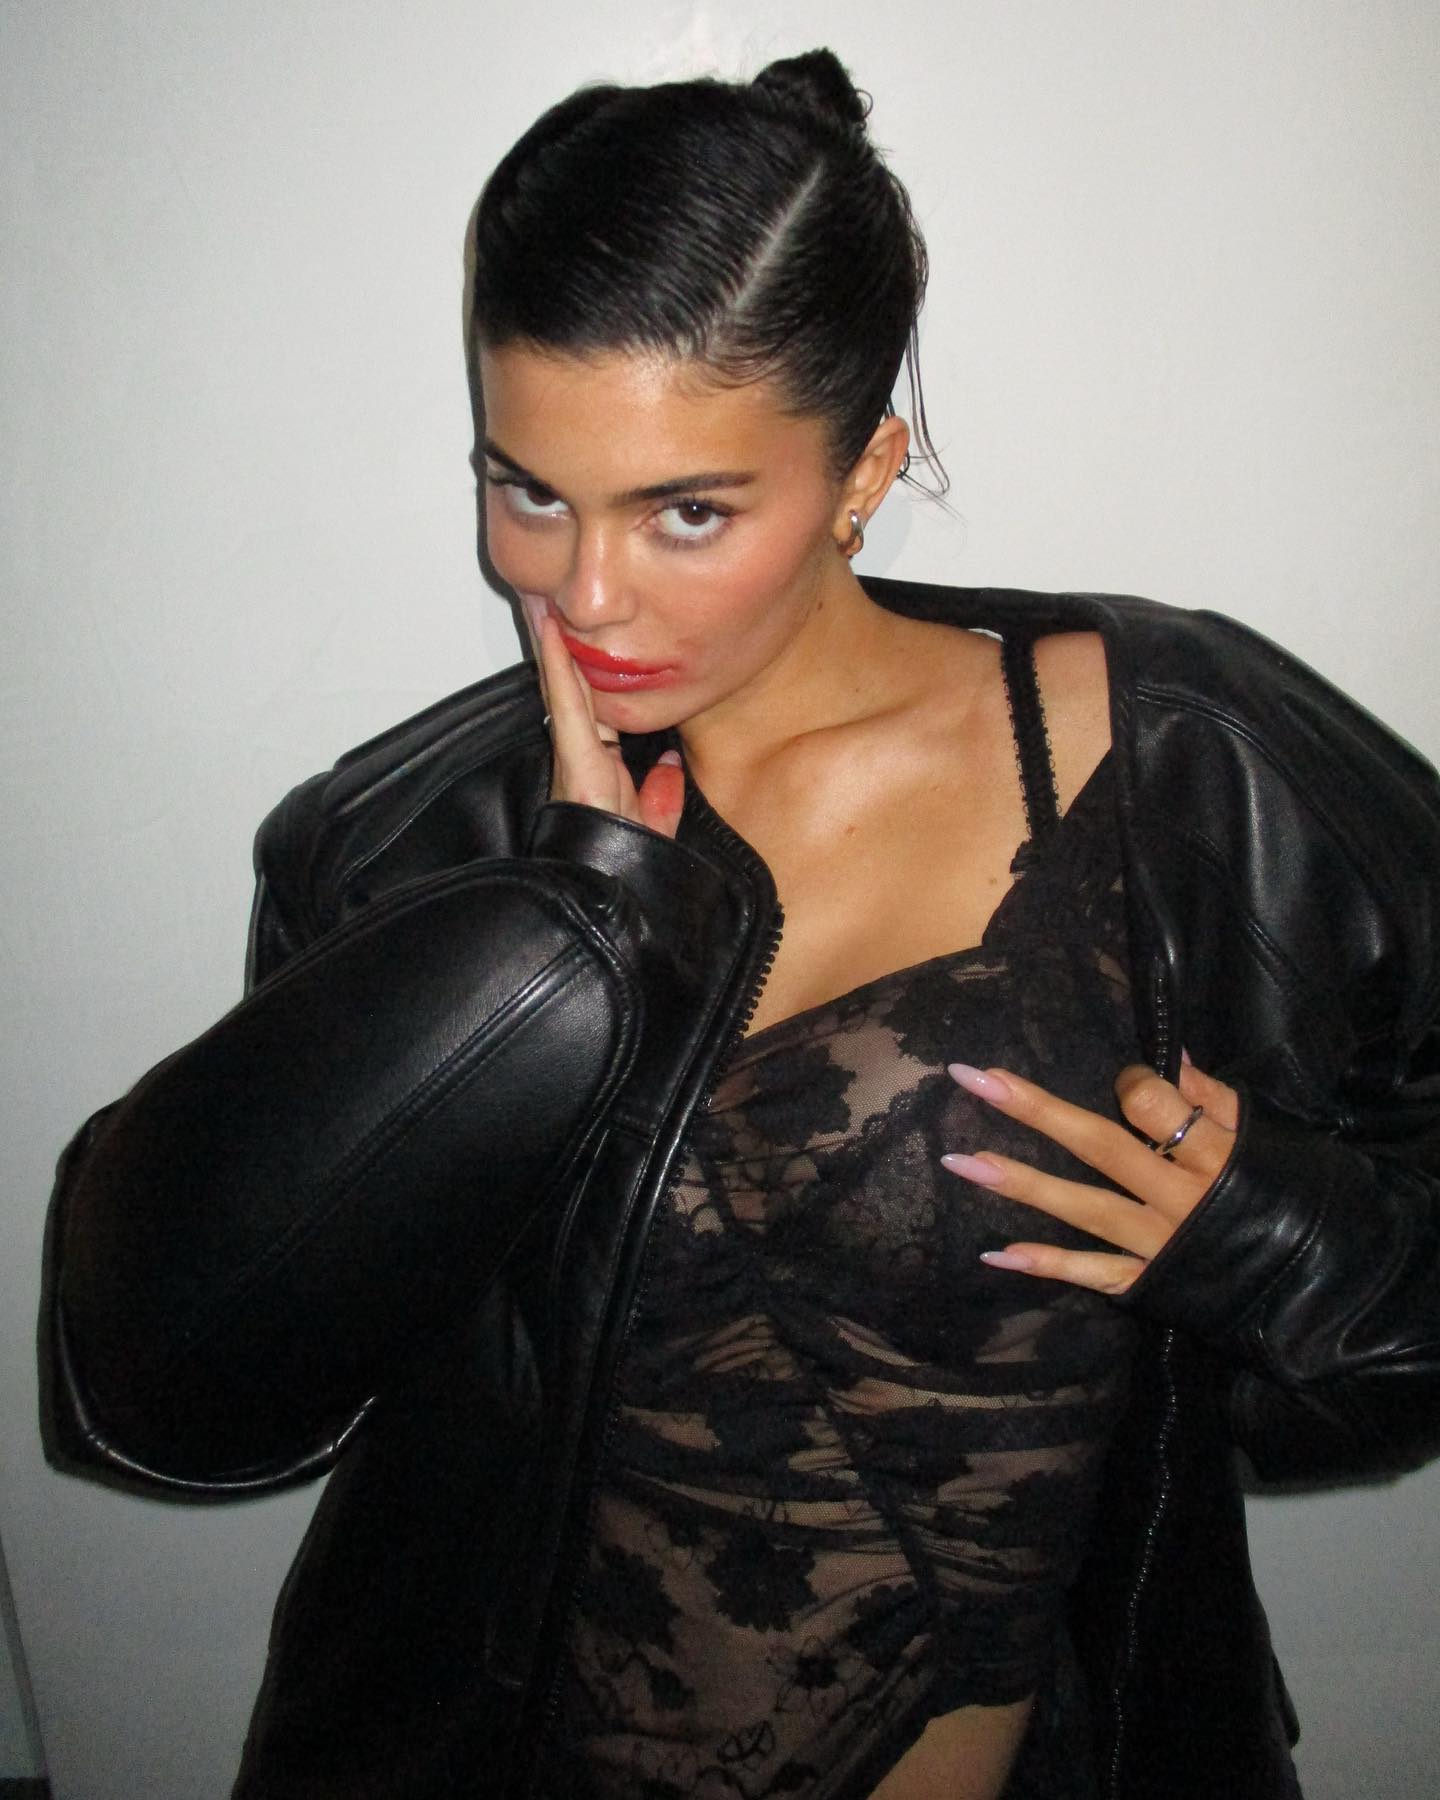 Kylie Jenner Gives Her Sister Kim Some Attitude! - Photo 14